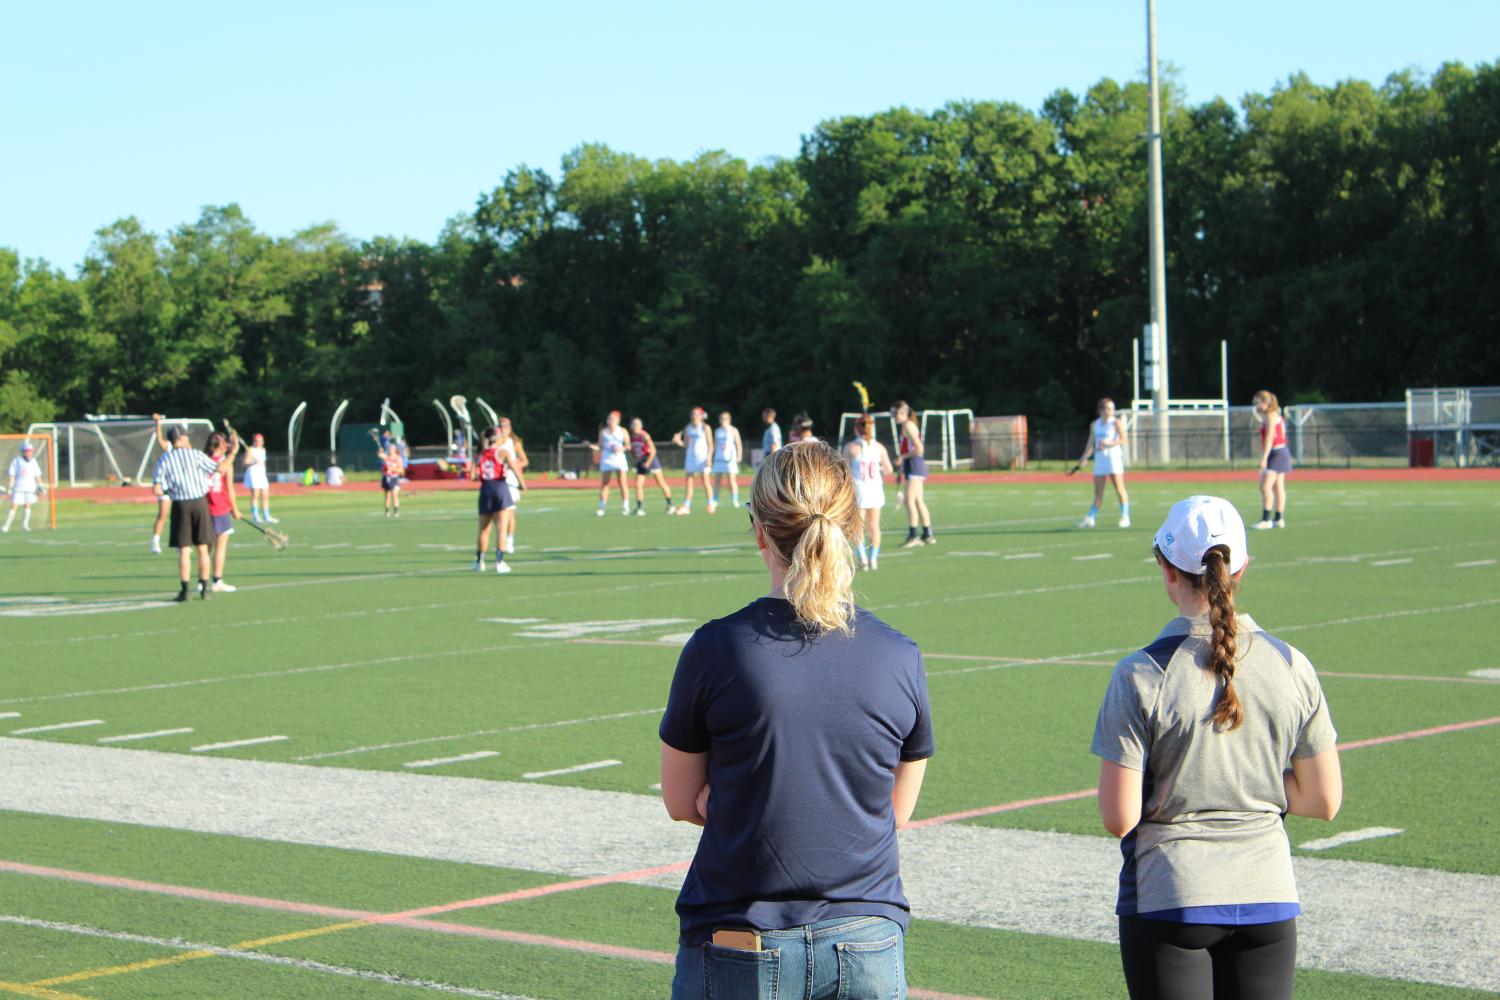 Jefferson Coaches (from left) Jacqueline Belker and Lauren Alam look on as a game progresses.